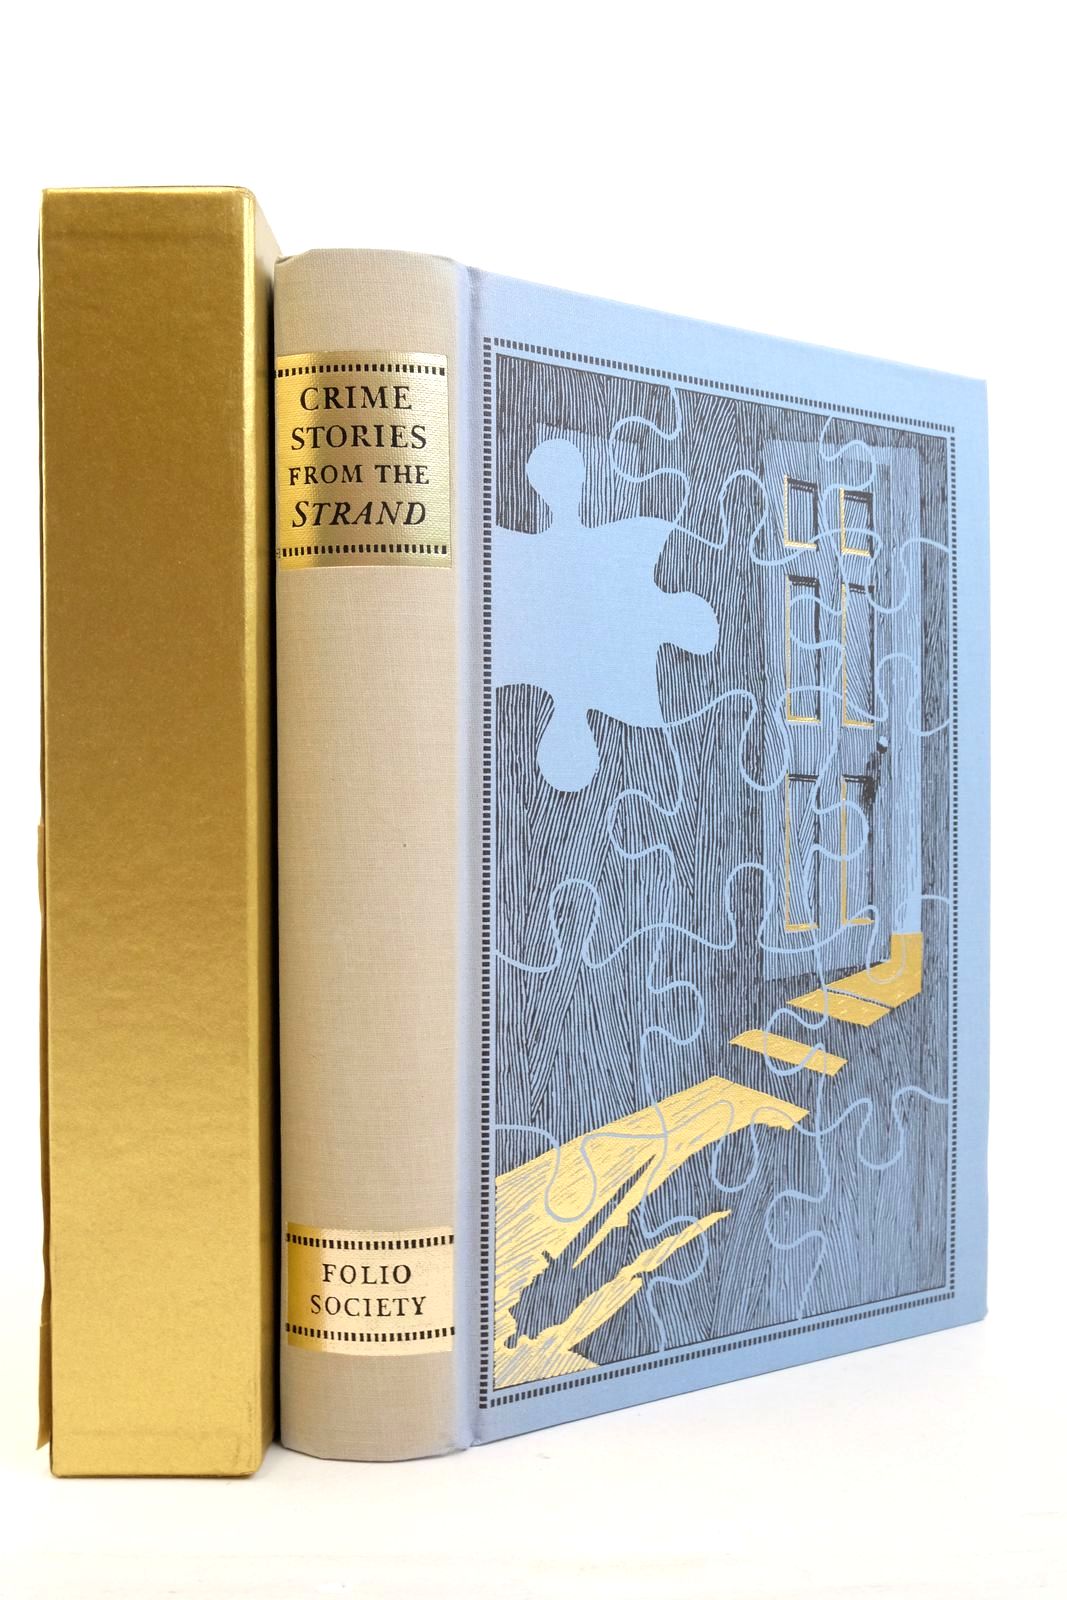 Photo of CRIME STORIES FROM THE 'STRAND' written by Beare, Geraldine Keating, H.R.F. illustrated by Eccles, David published by Folio Society (STOCK CODE: 2138368)  for sale by Stella & Rose's Books